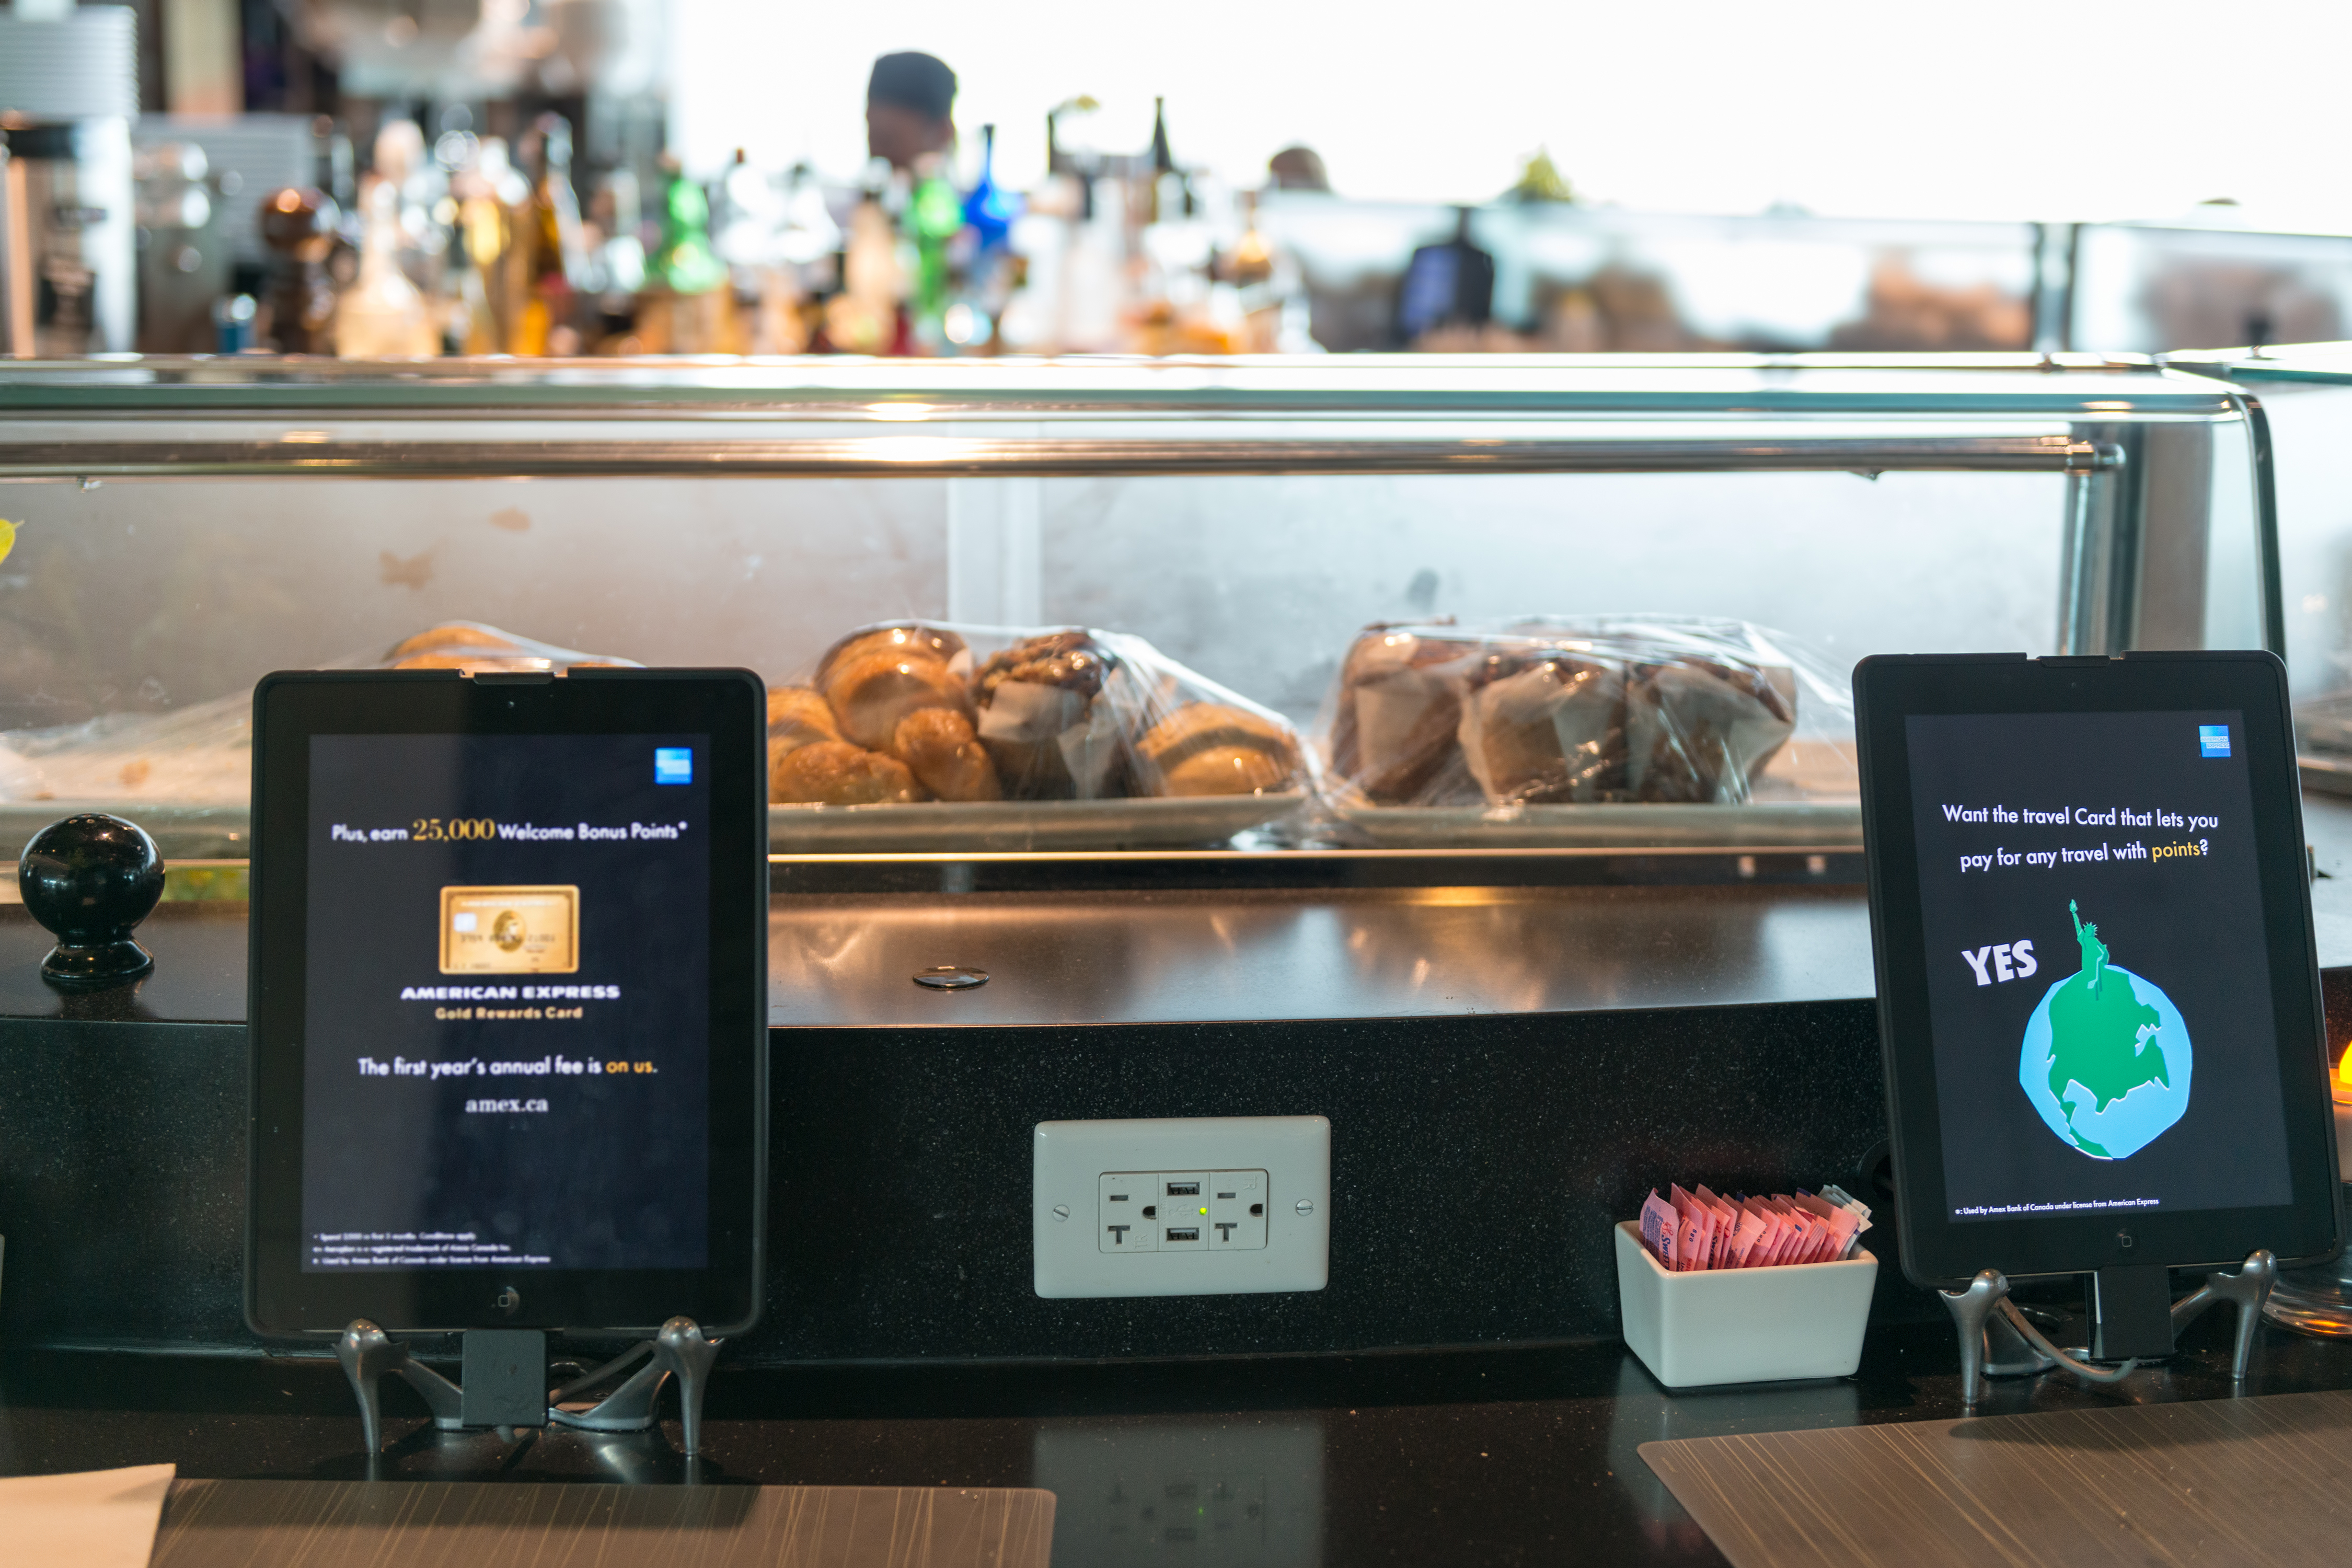 Restaurants are starting to use digital technology for self